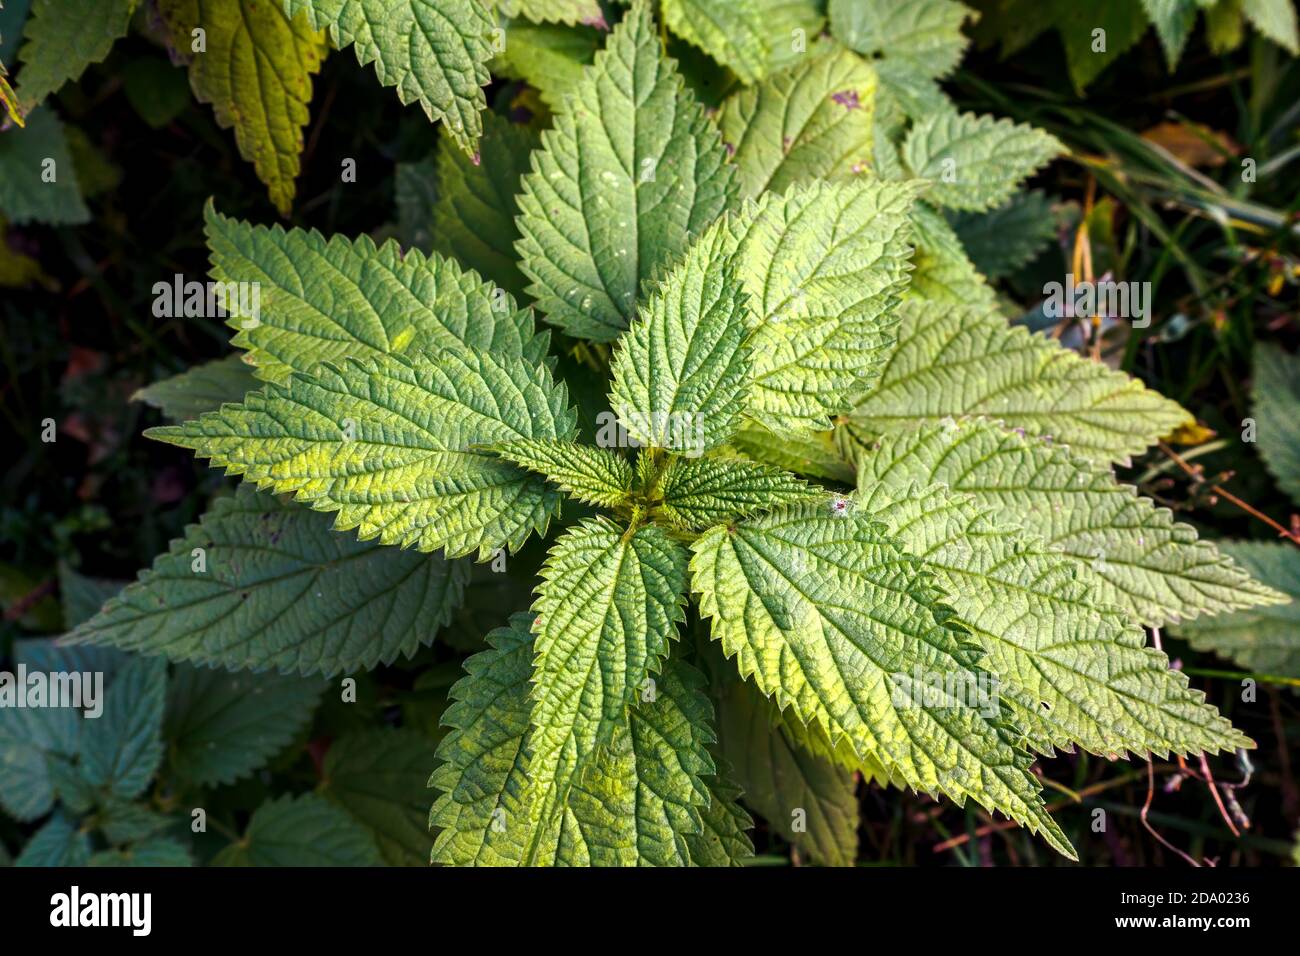 Top view of stinging nettle, green leaves Urtica dioica. Stock Photo